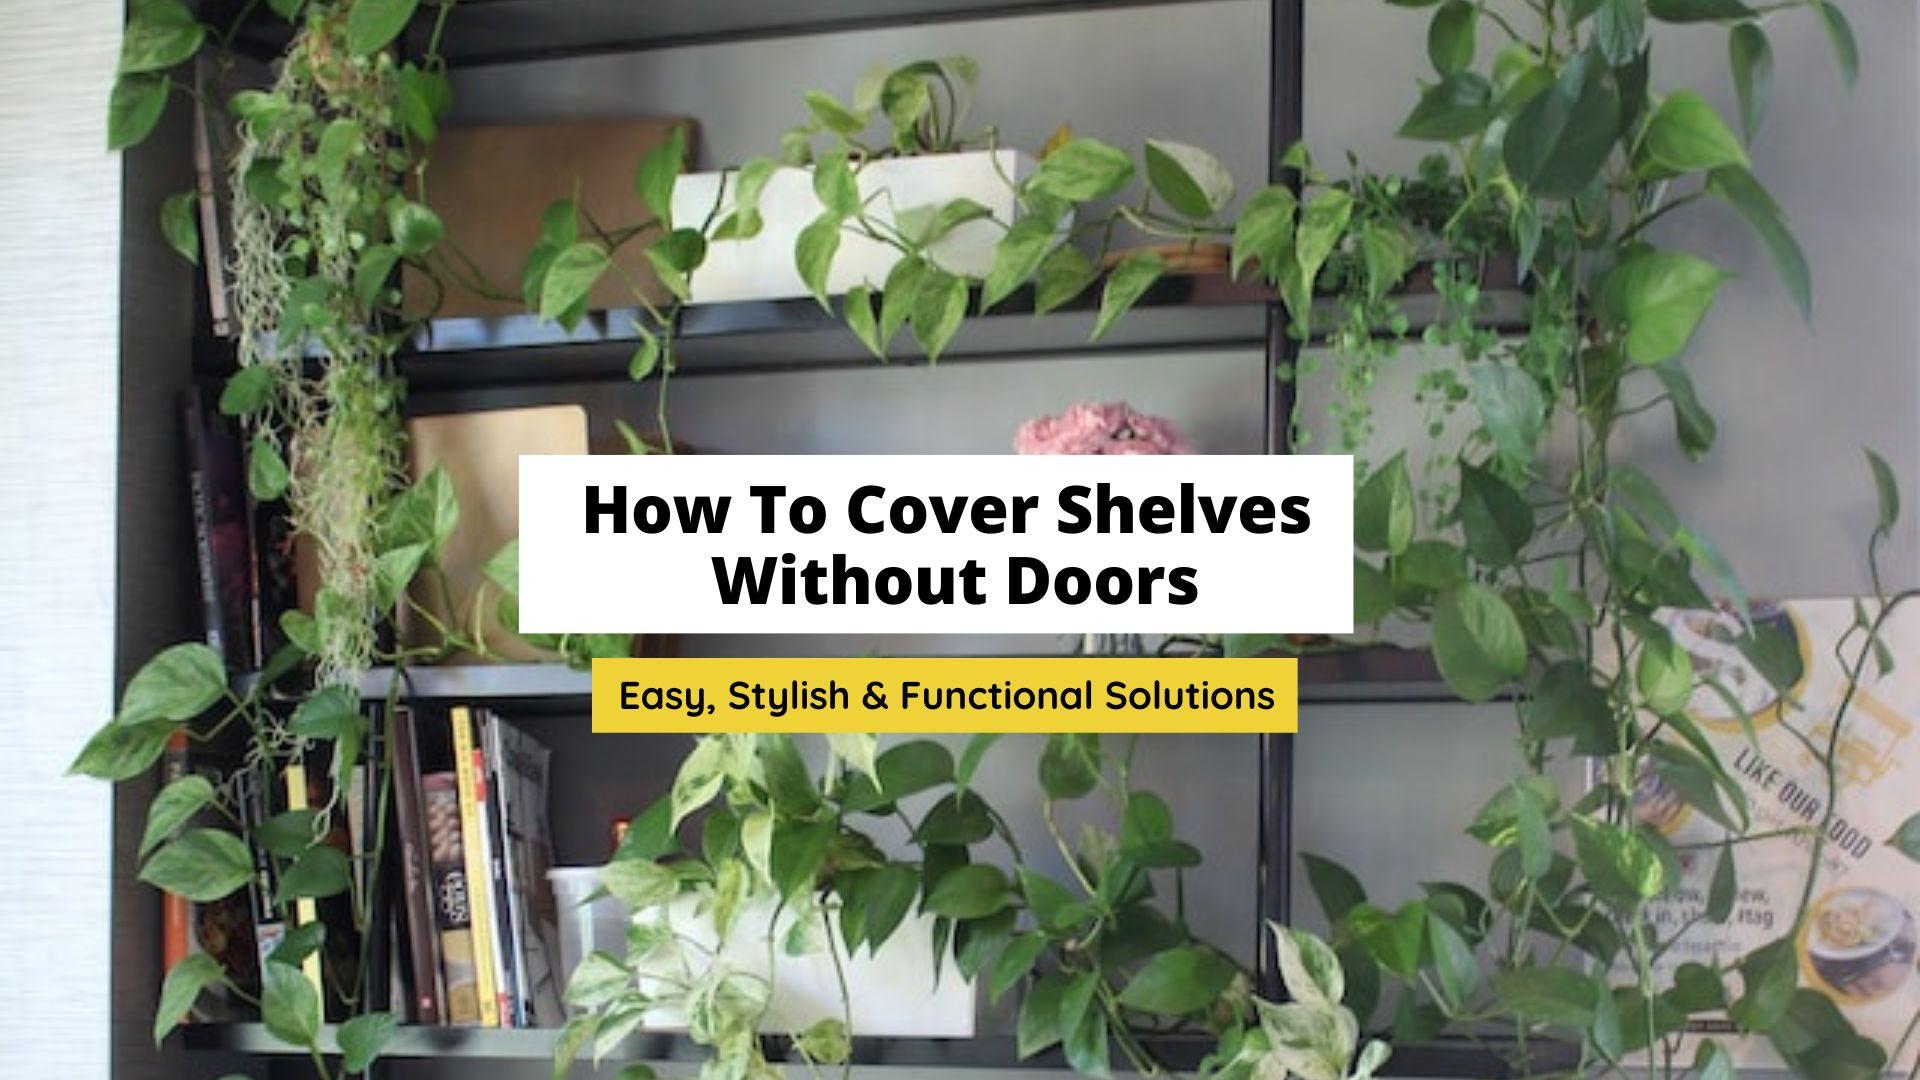 How To Cover Shelves Without Doors